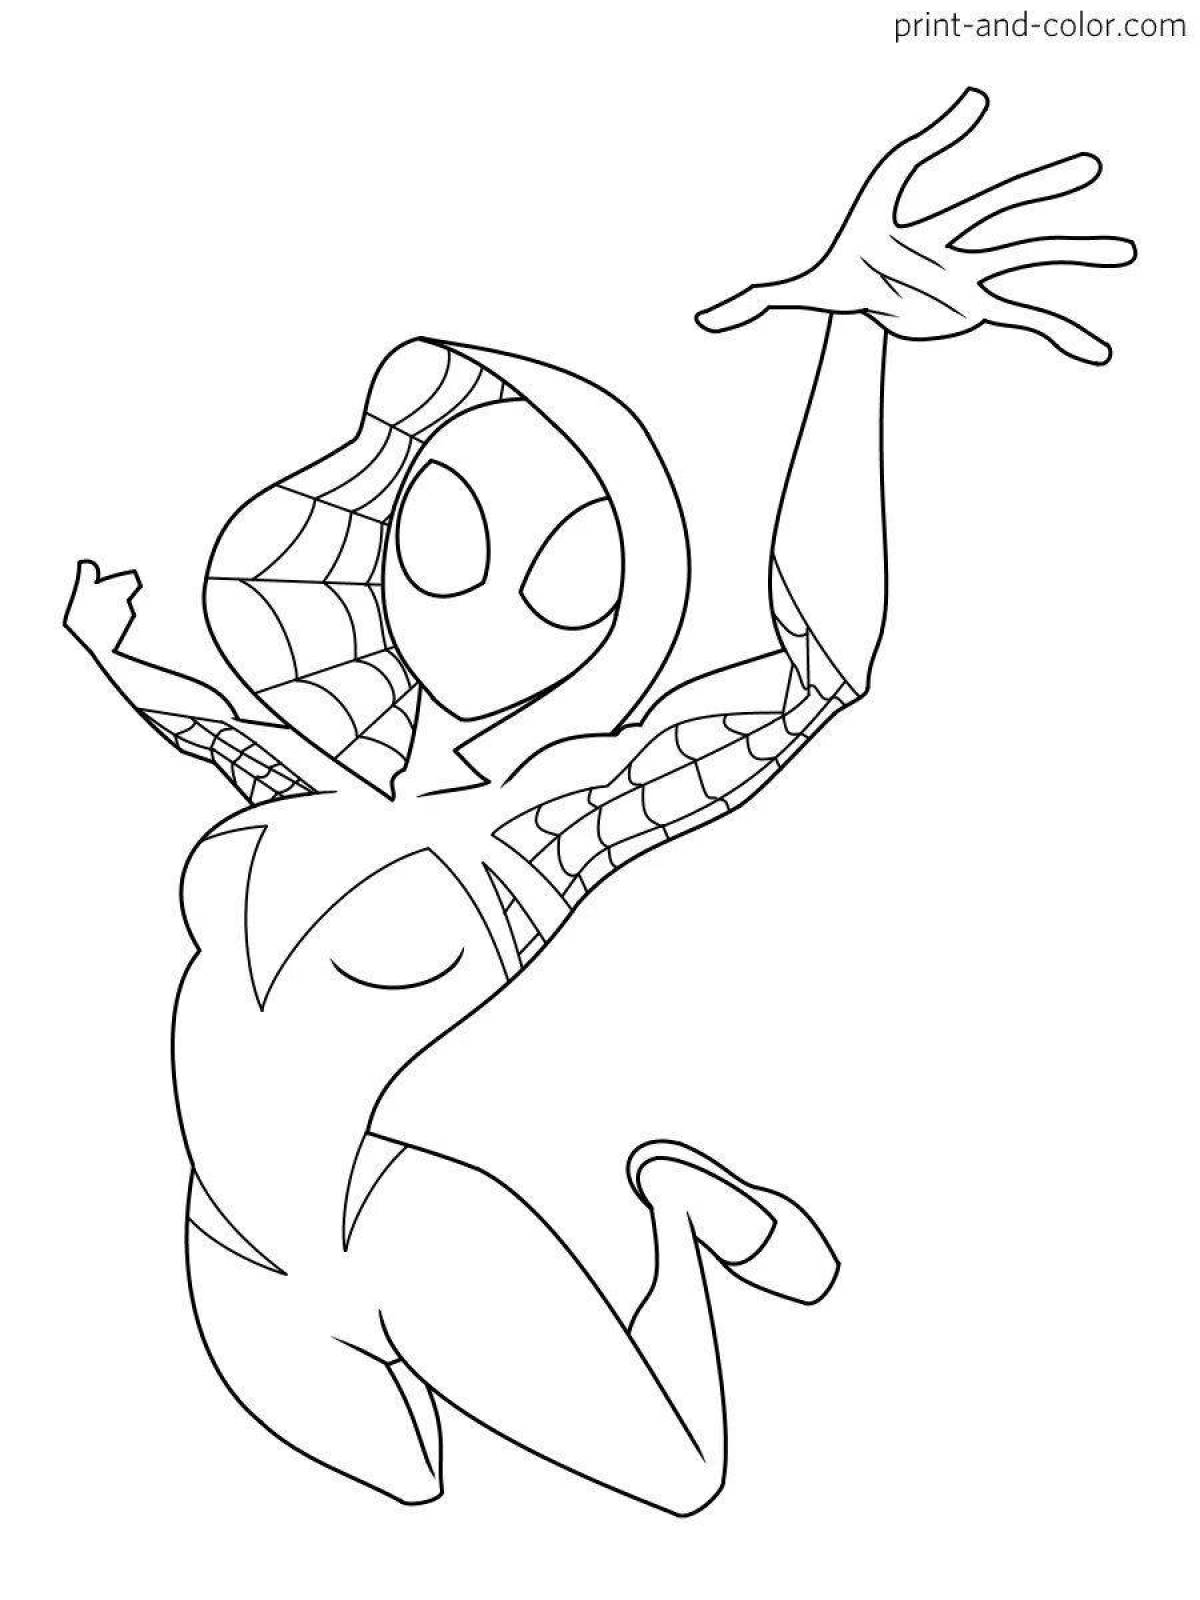 Sinister spiderman ghost coloring book